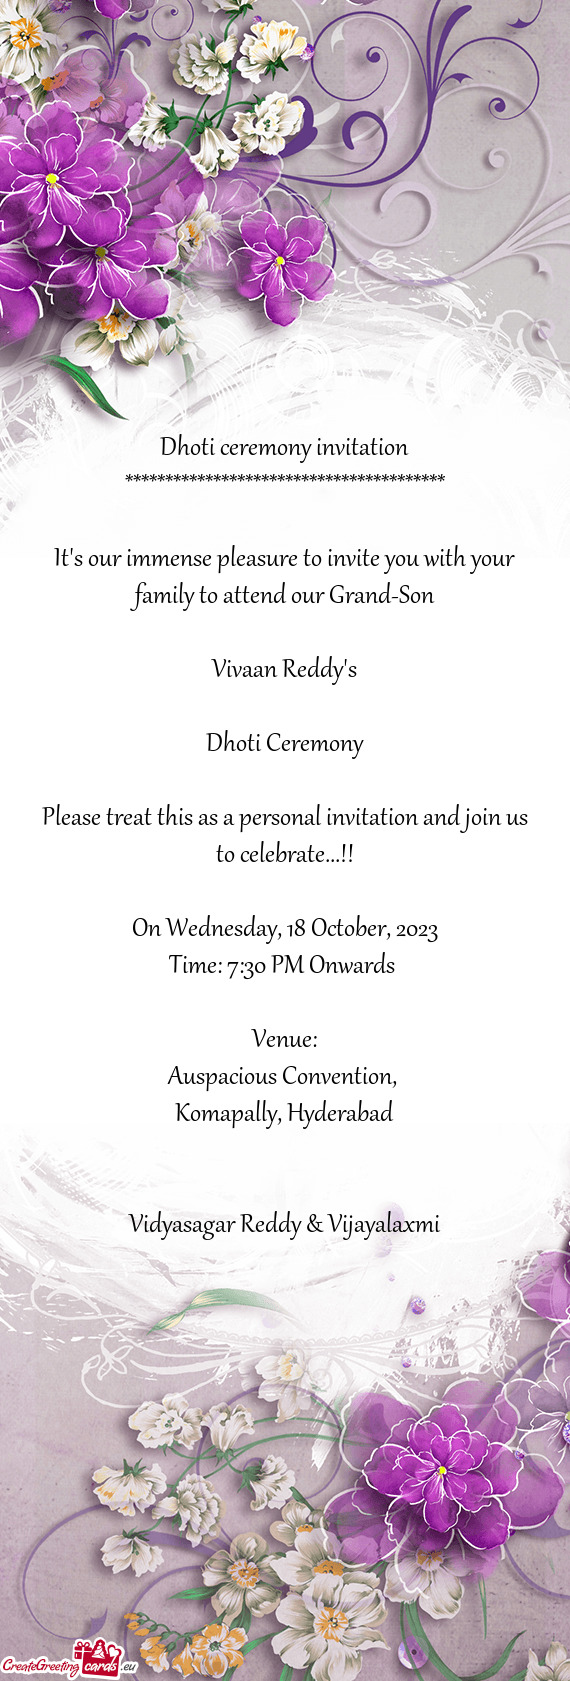 Please treat this as a personal invitation and join us to celebrate